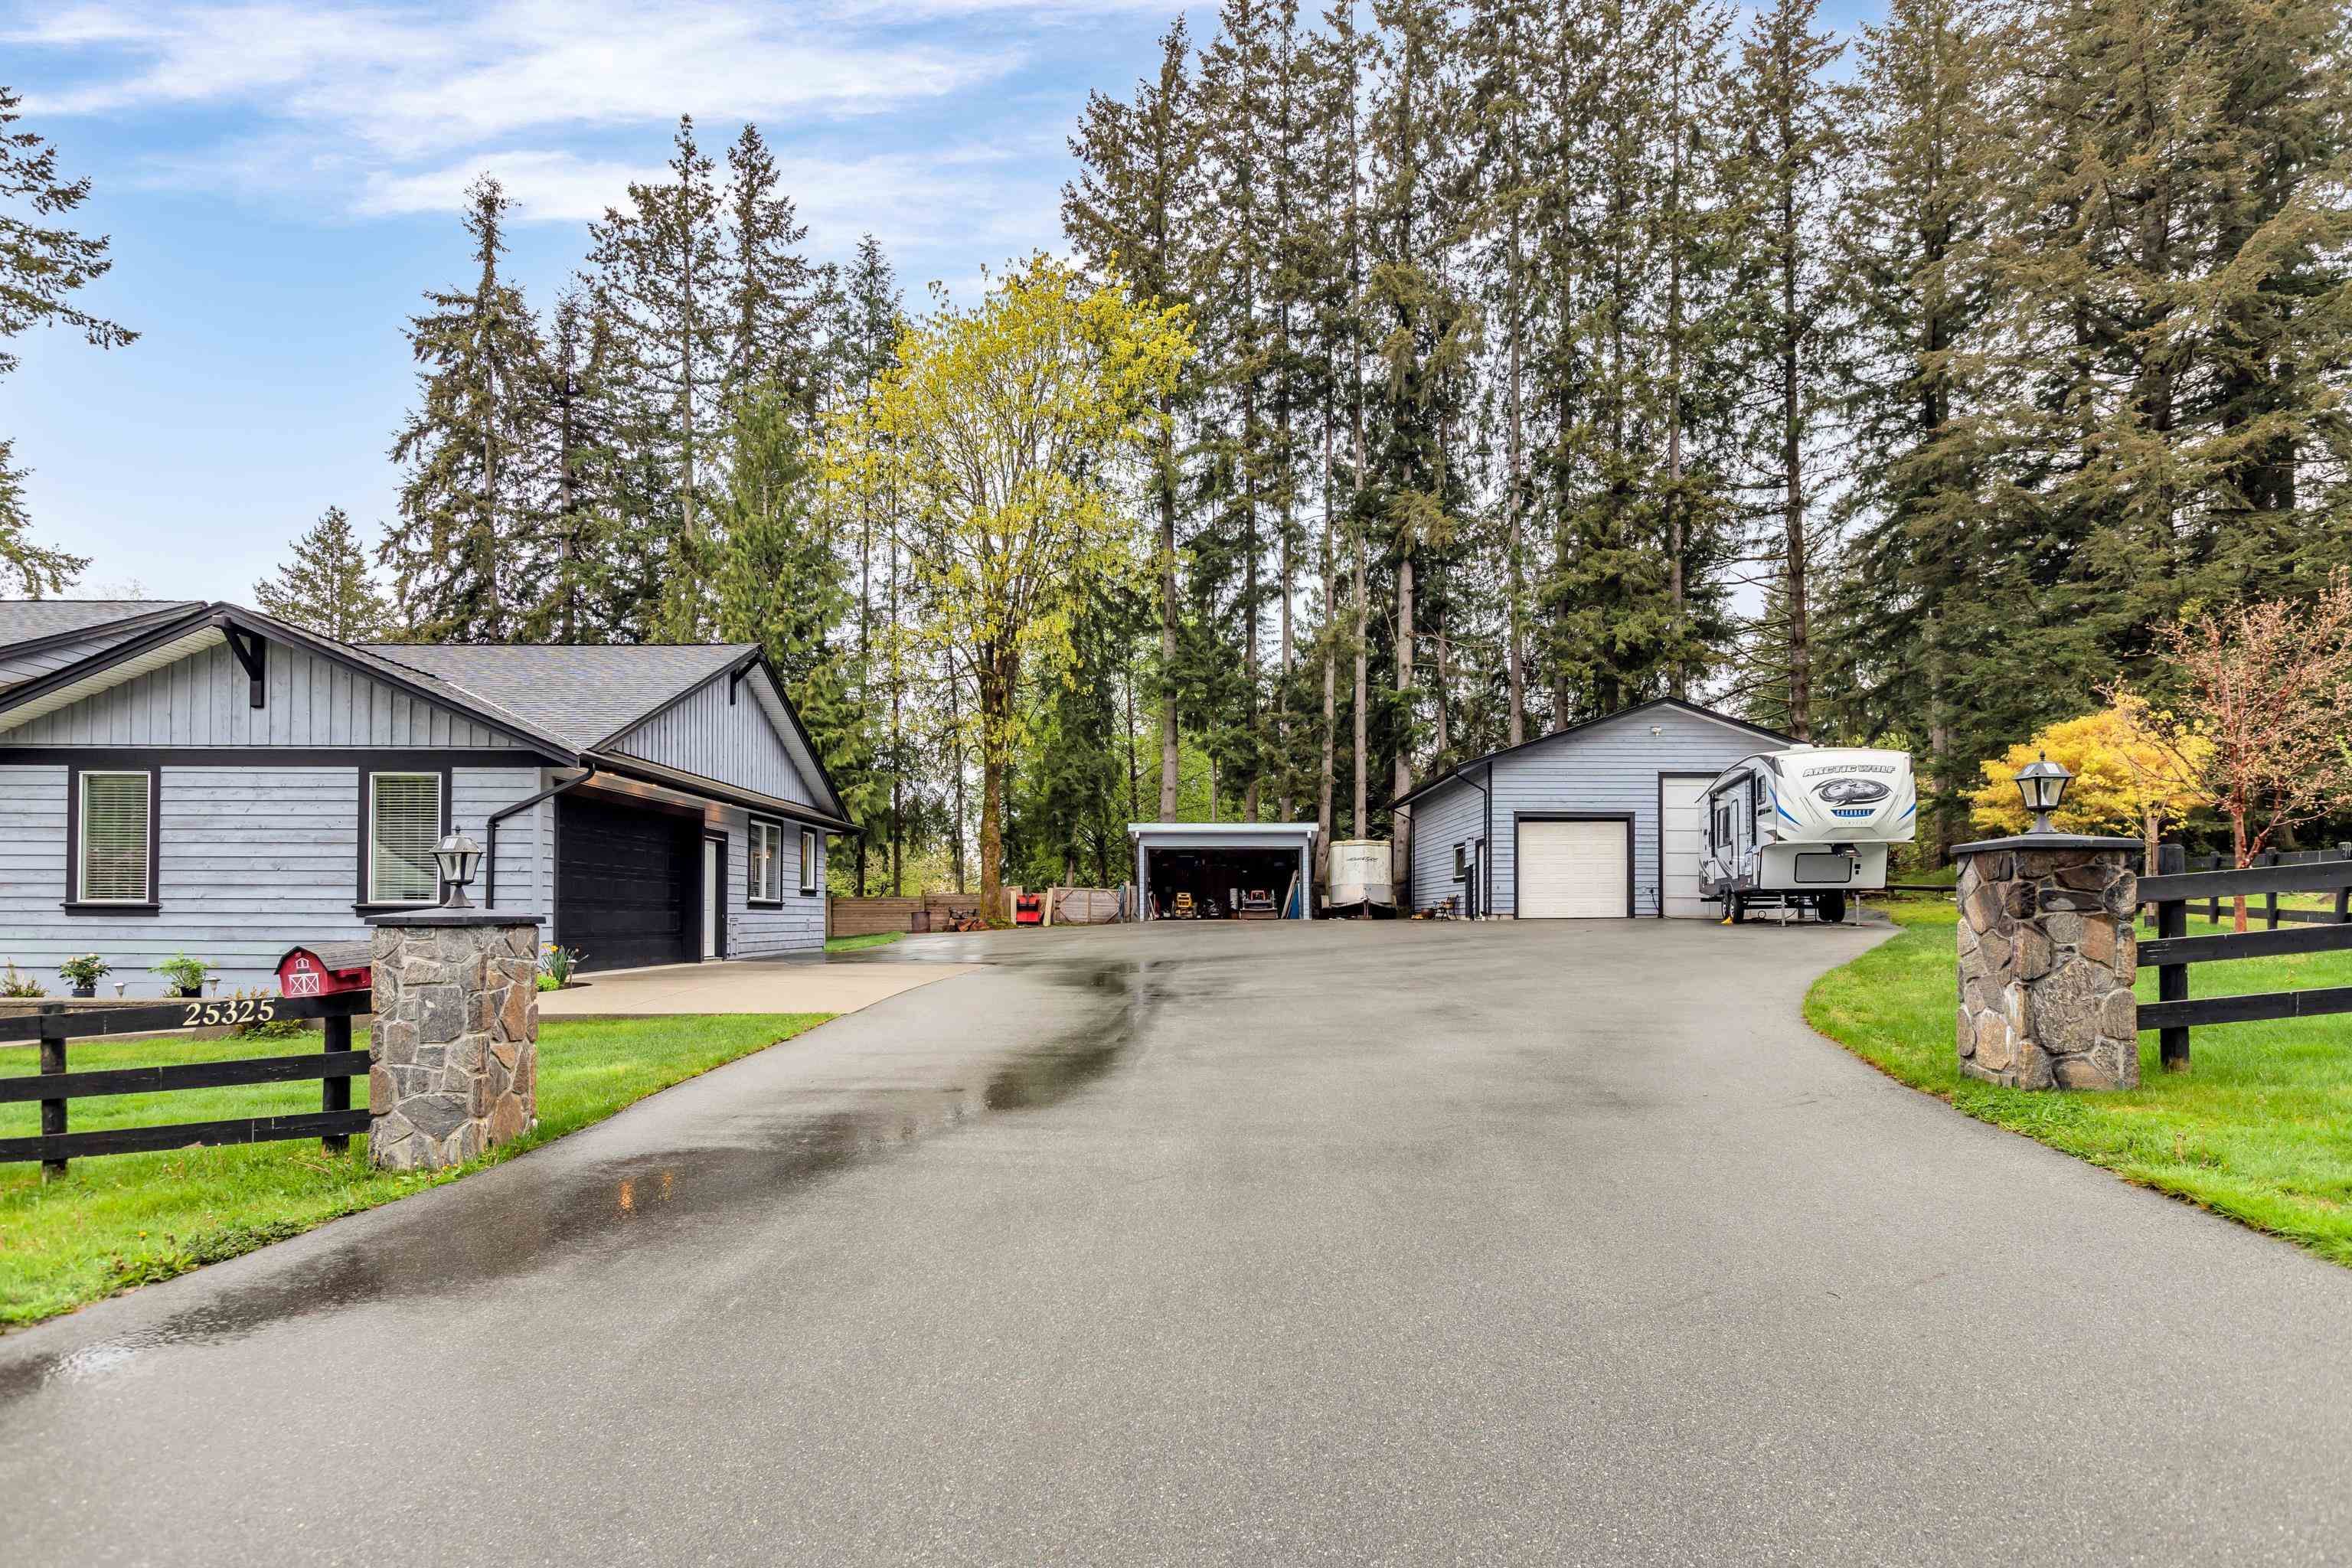 Main Photo: 25325 130 Avenue in Maple Ridge: Websters Corners House for sale : MLS®# R2684747